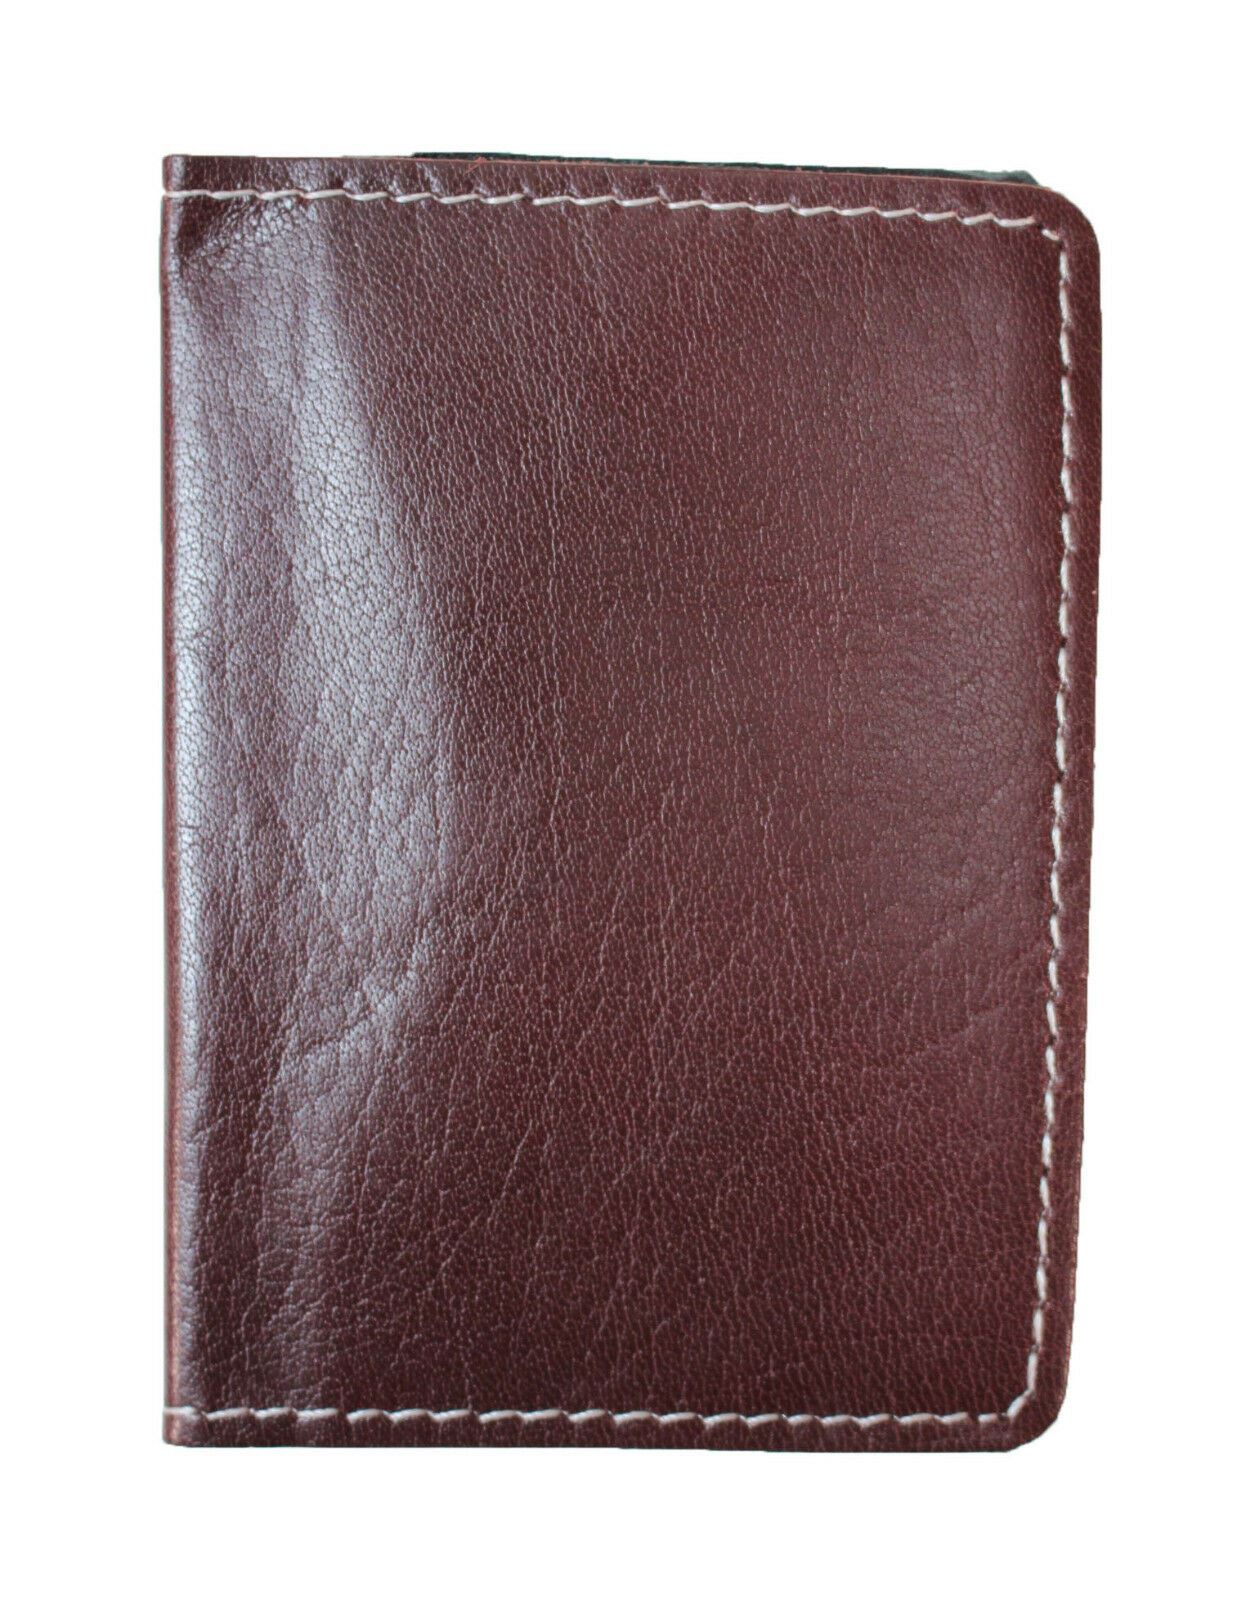 100% Genuine Real Leather Top Quality Unisex Mini Slim Wallet Credit Card Holder